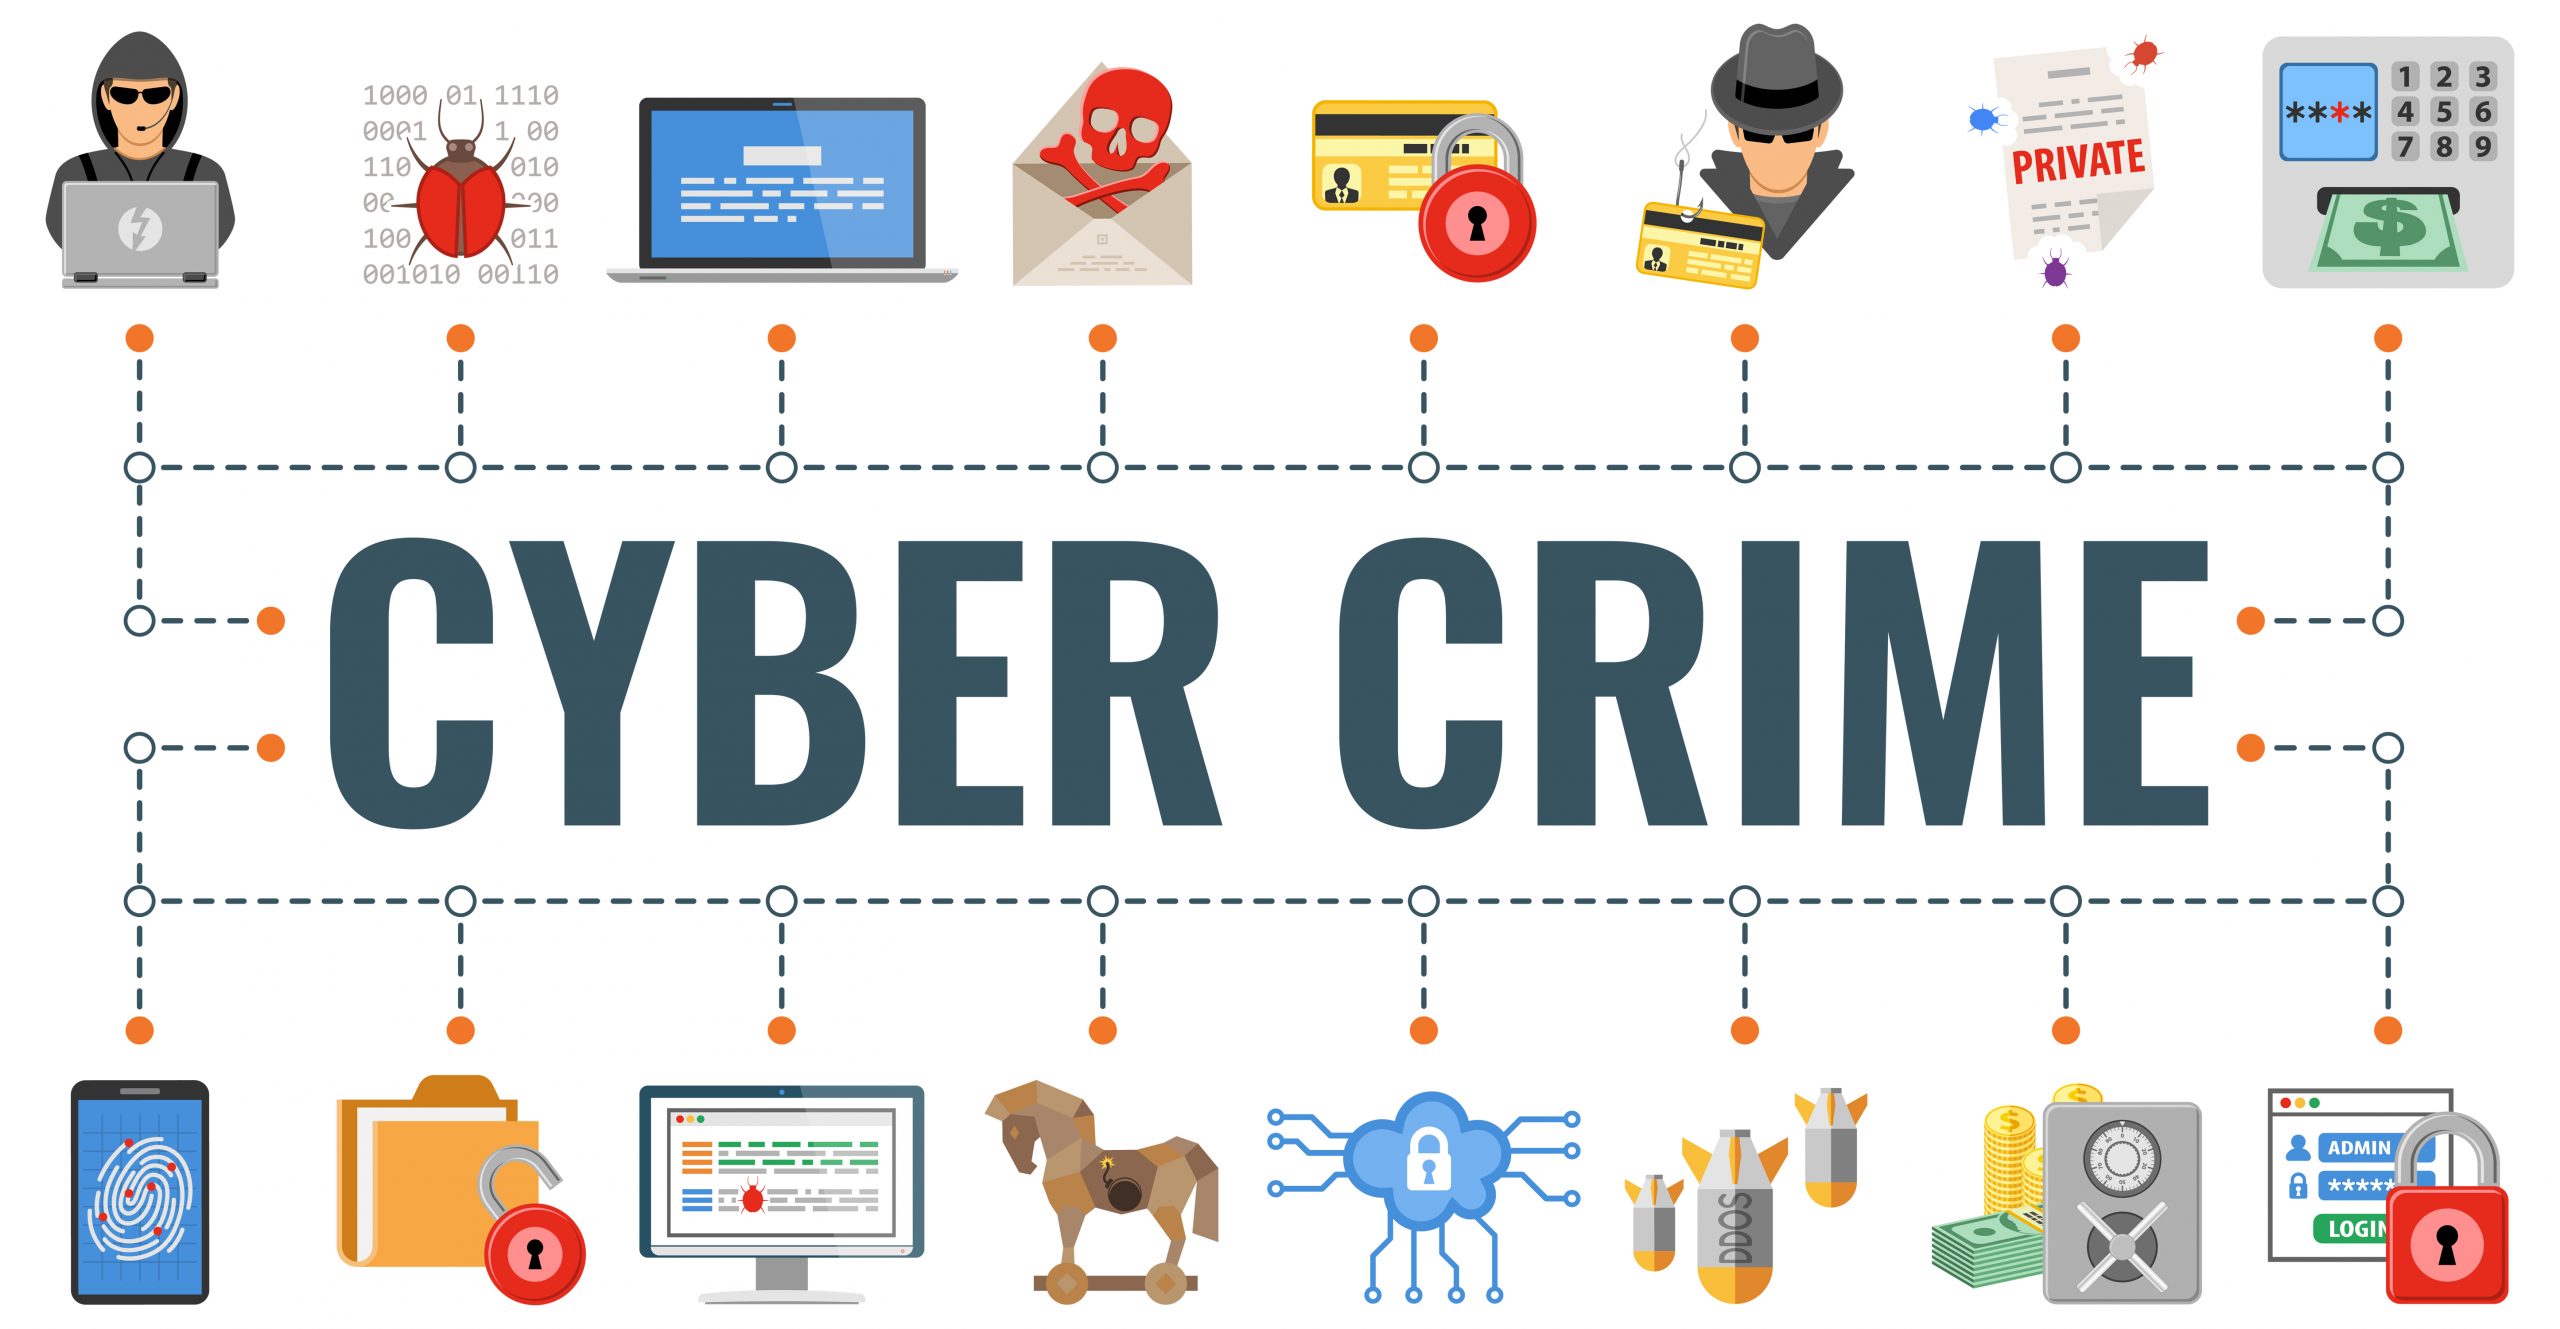 Cybercrime is an evolving form of transnational crime